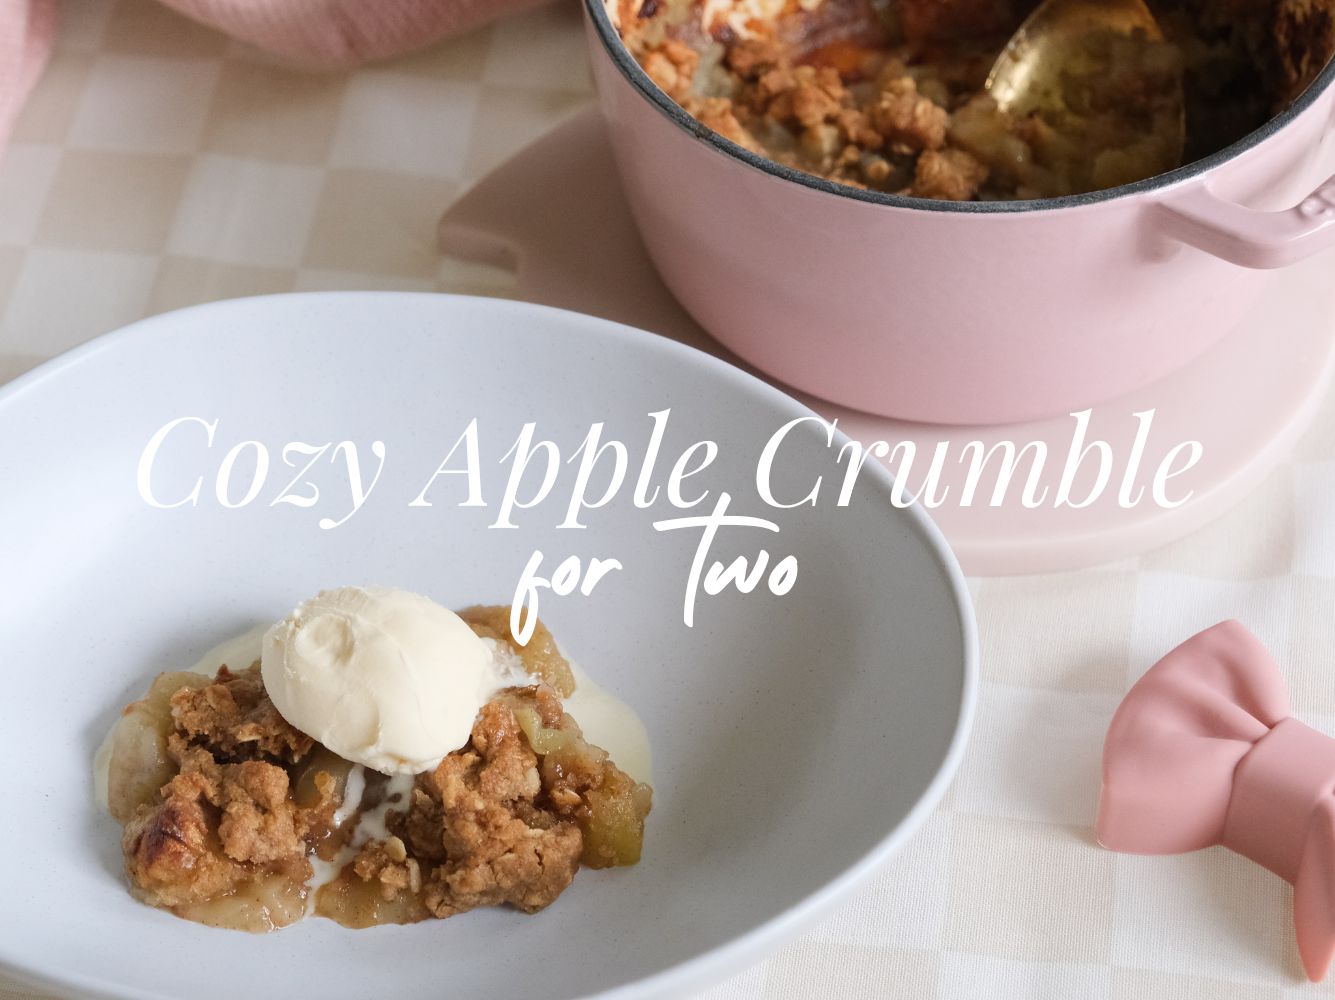 Cozy Apple Crumble for Two